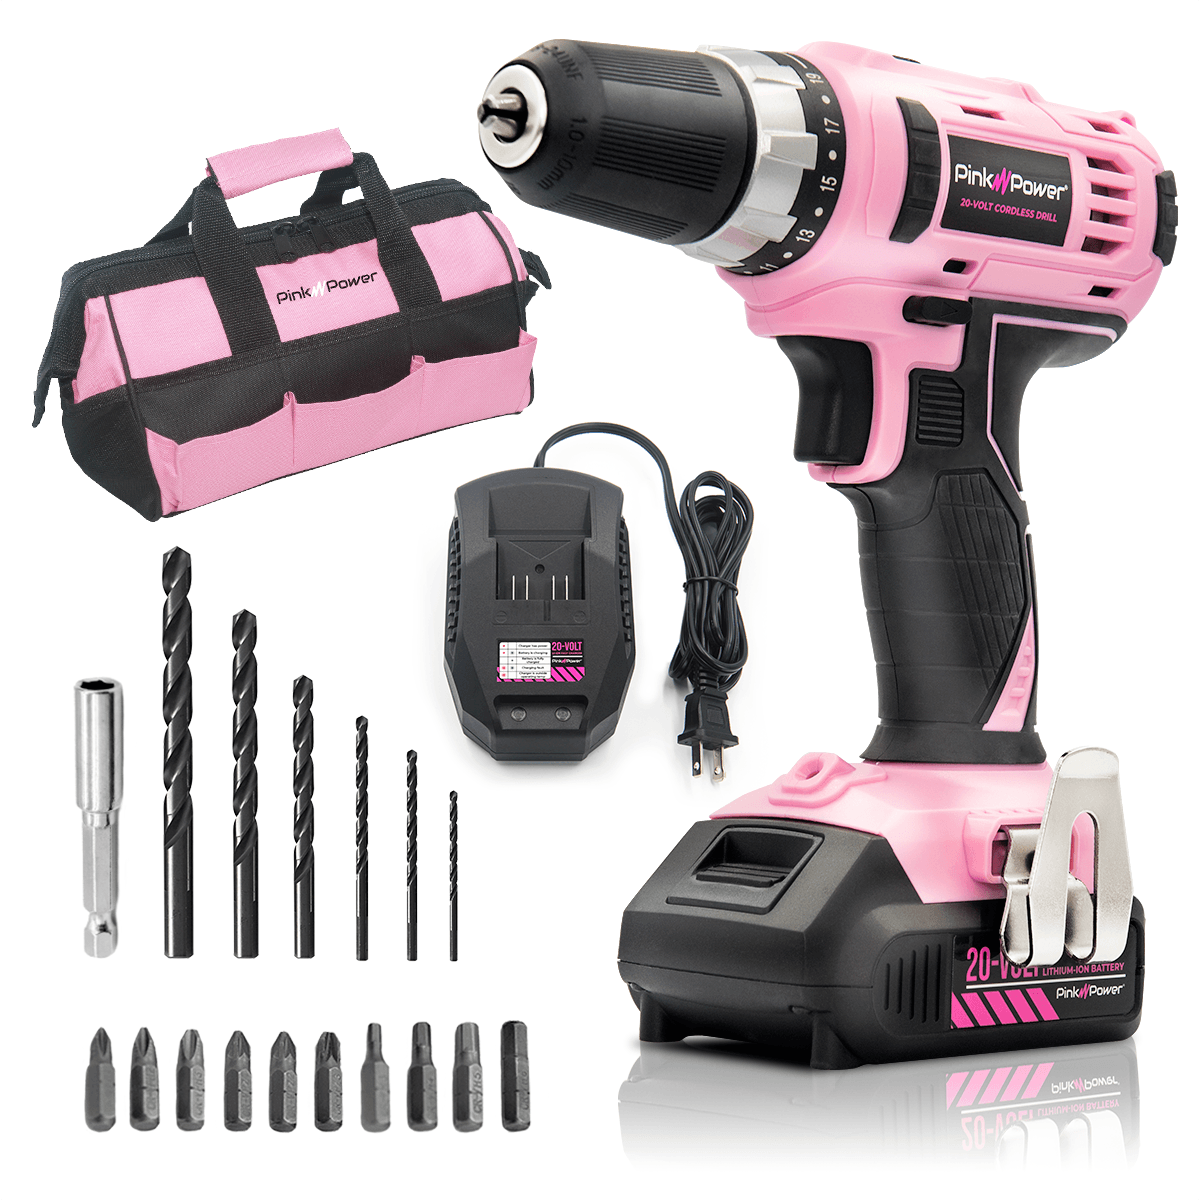 20 VOLT LITHIUM ION CORDLESS DRILL KIT Pink Power 